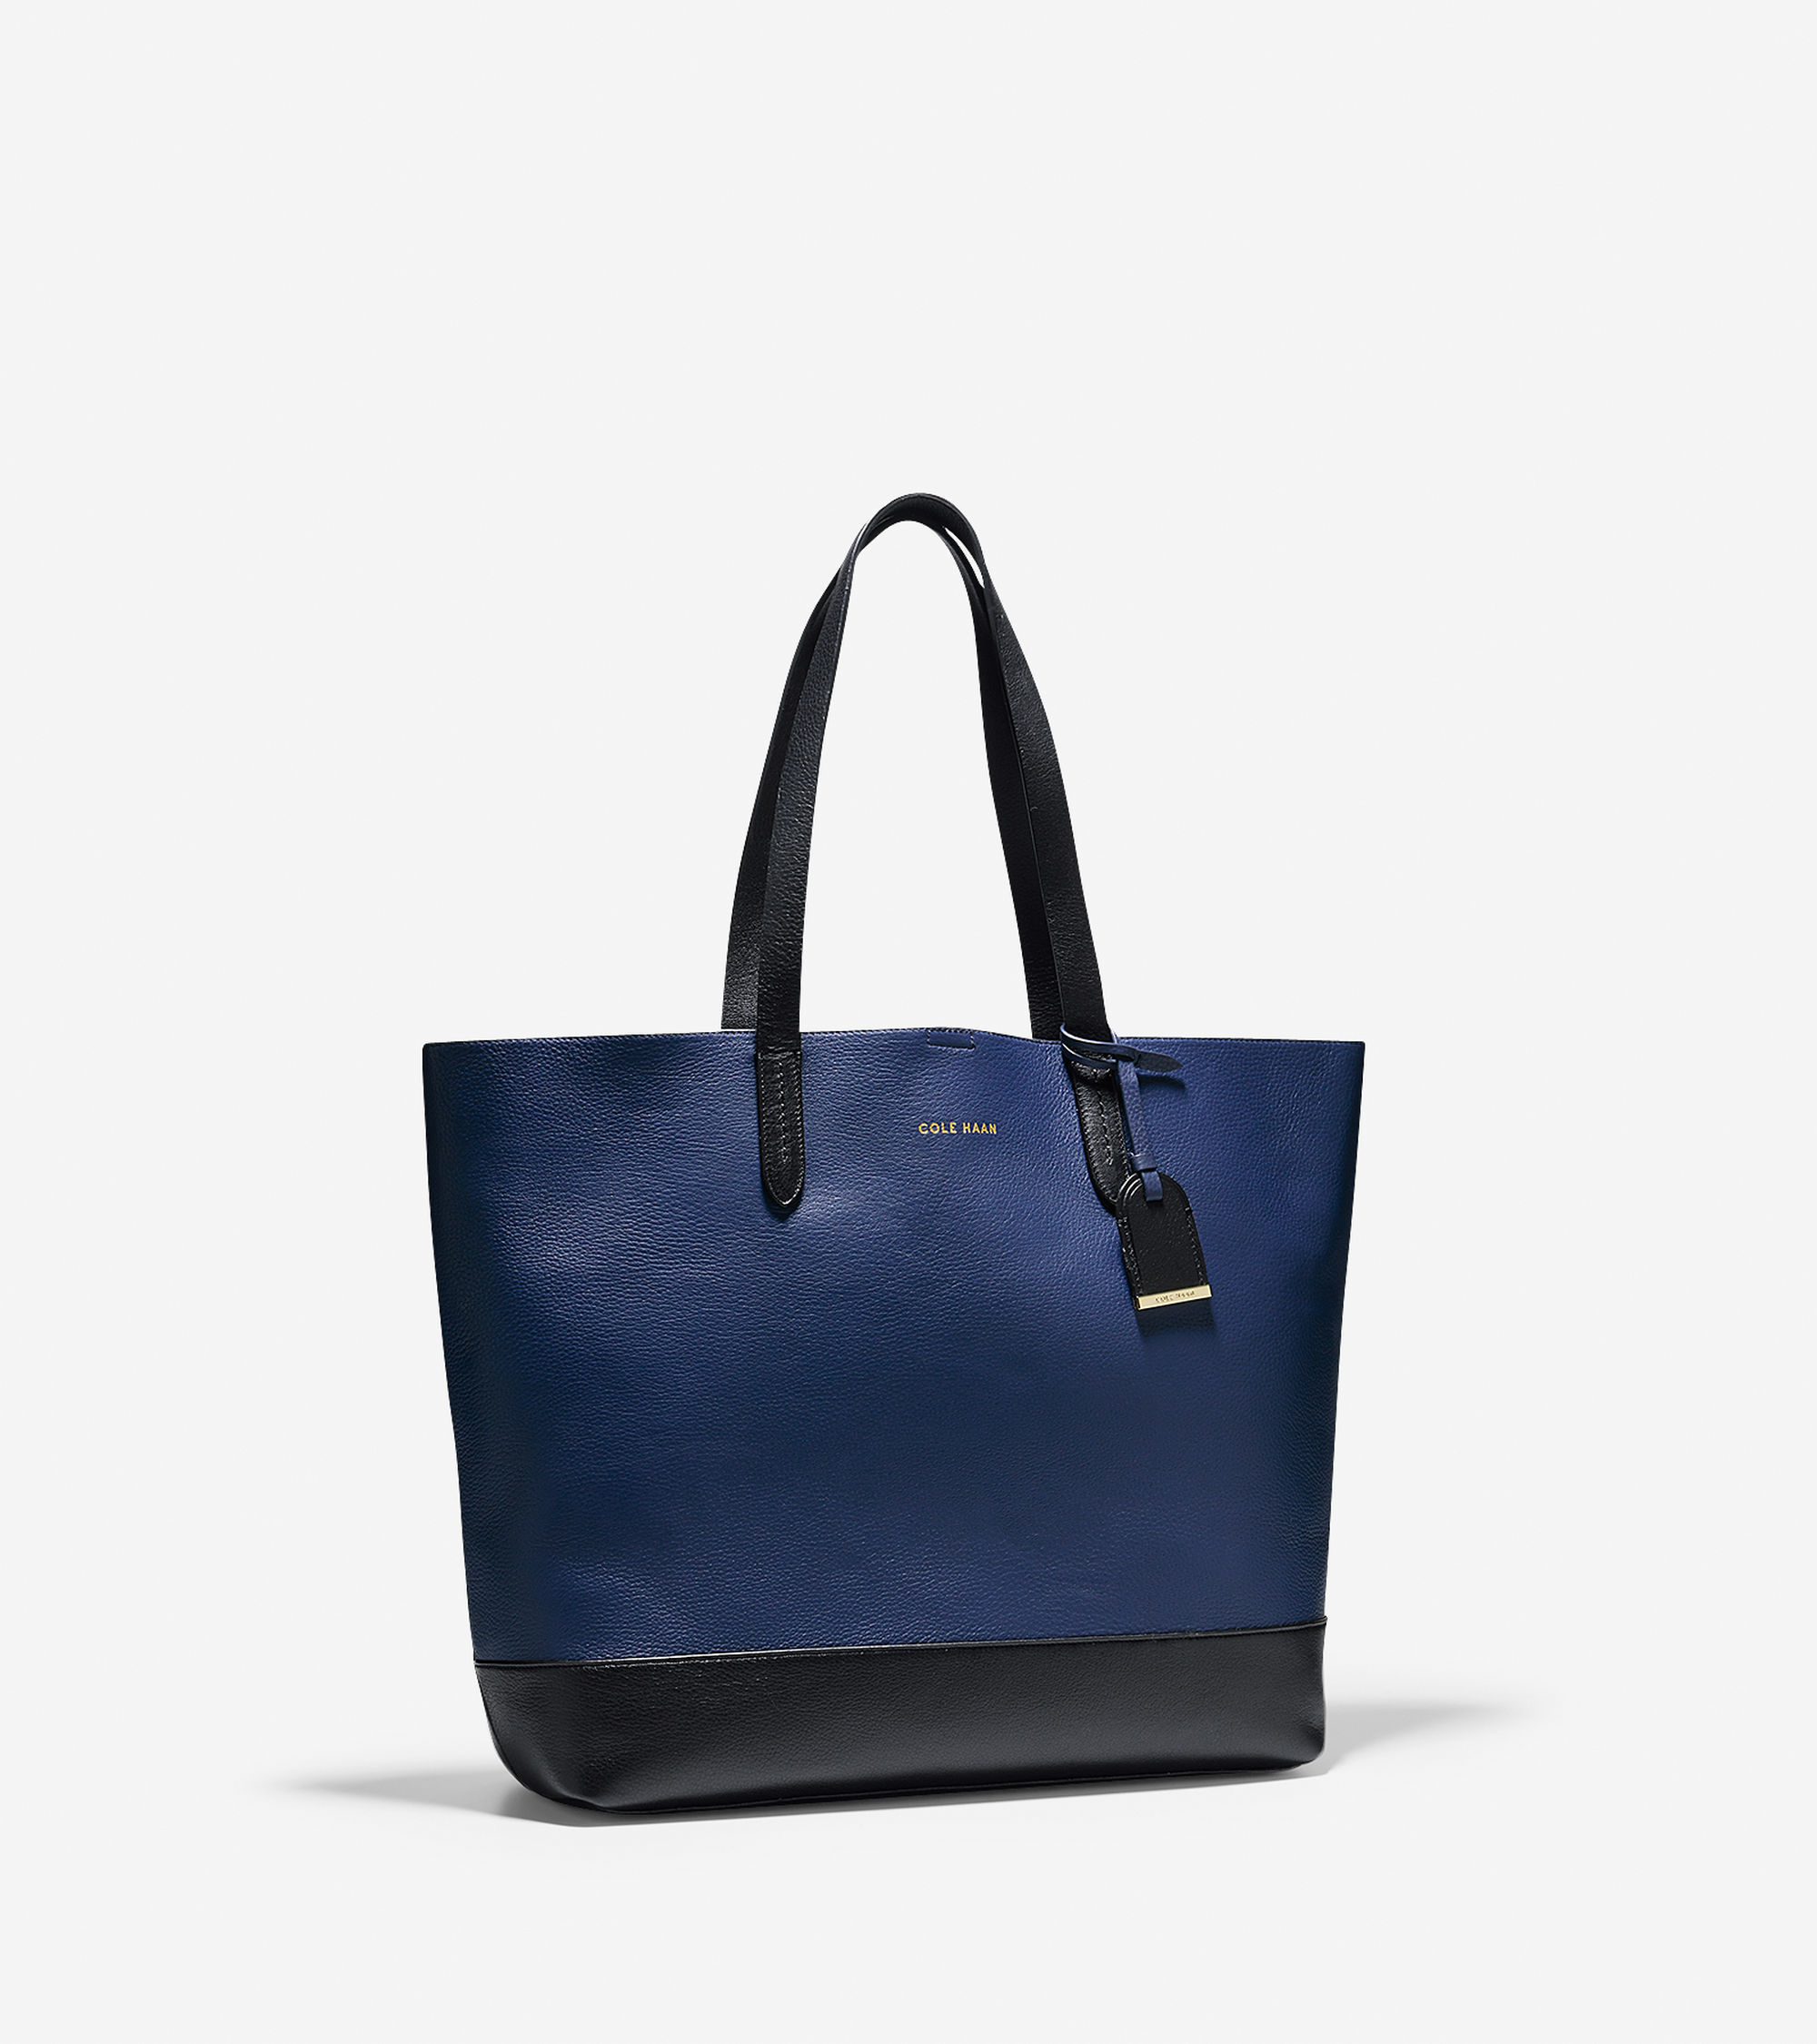 Lyst - Cole Haan Palermo Tote in Blue